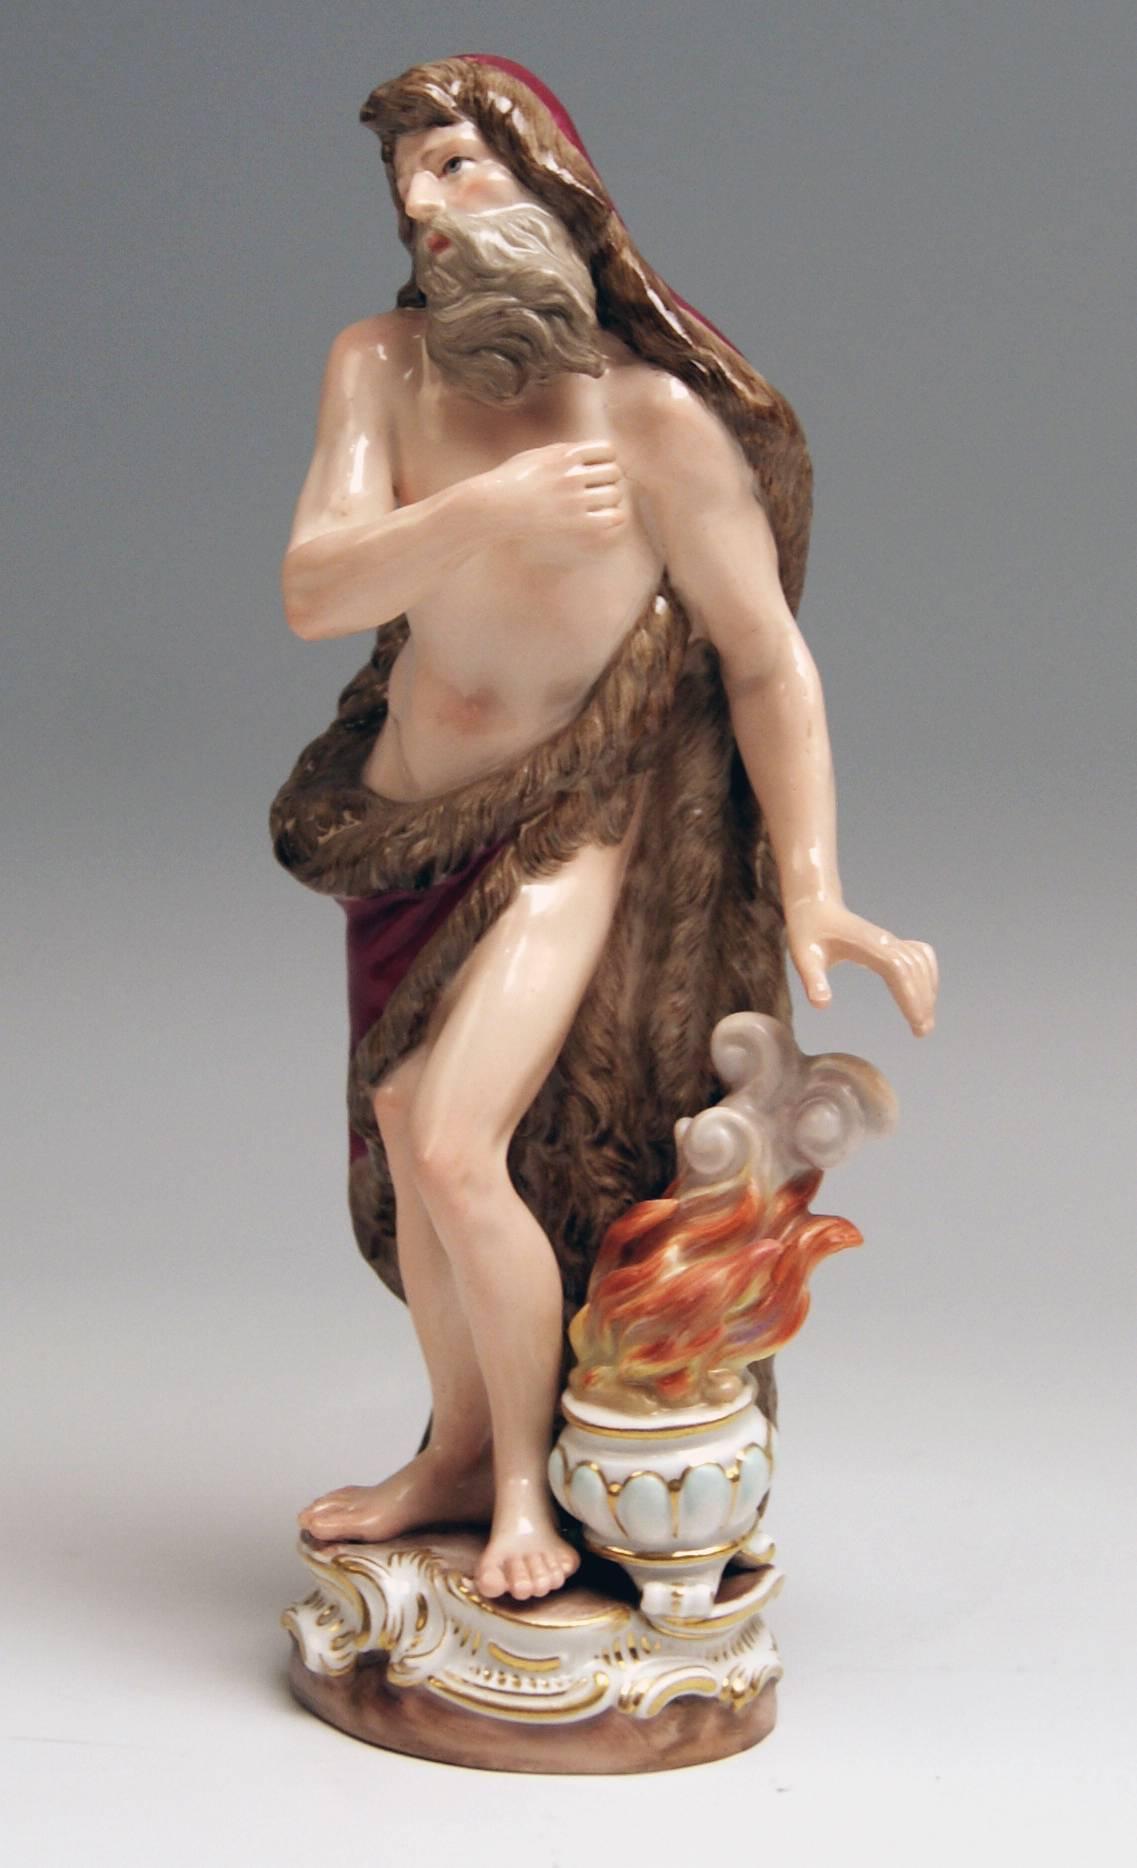 Meissen most remarkable figurine: Winter

Measures / dimensions:
height 8.07 inches / 20.5 cm 
diameter of base 2.36 inches / 6.0 cm

Manufactory: Meissen
Hallmarked: Blue Meissen Sword Mark (glazed bottom)
First quality 
Dating: 19th